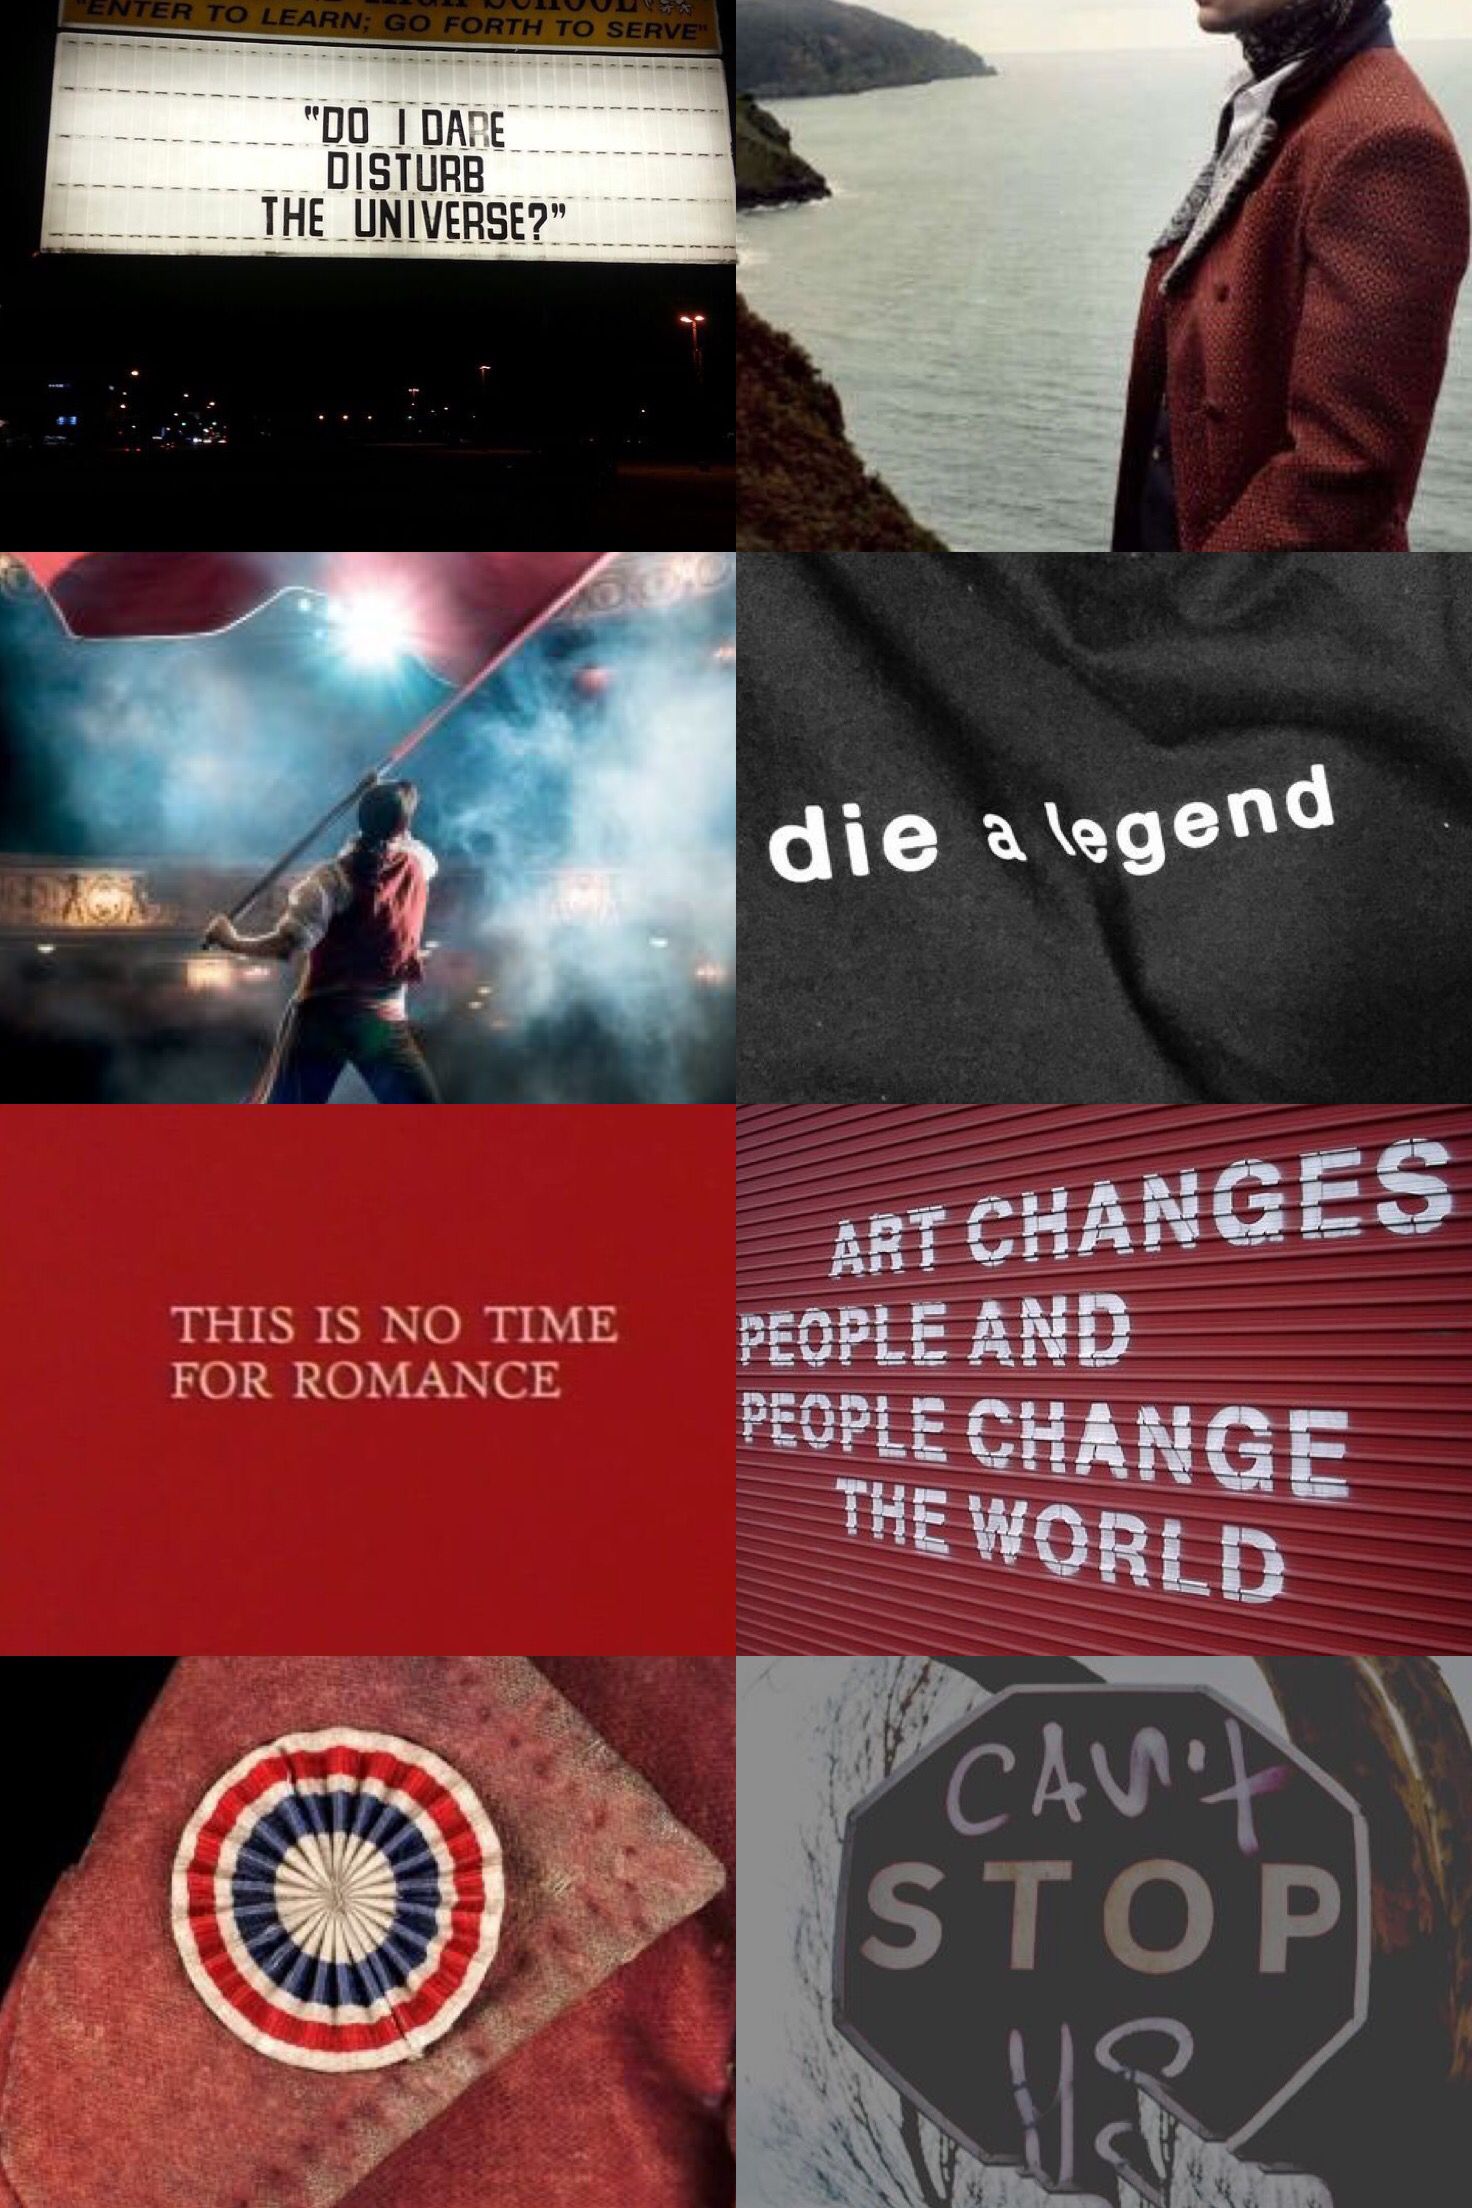 Enjolras from les mis aesthetic. Les miserables, Life is strange, Theatre kid